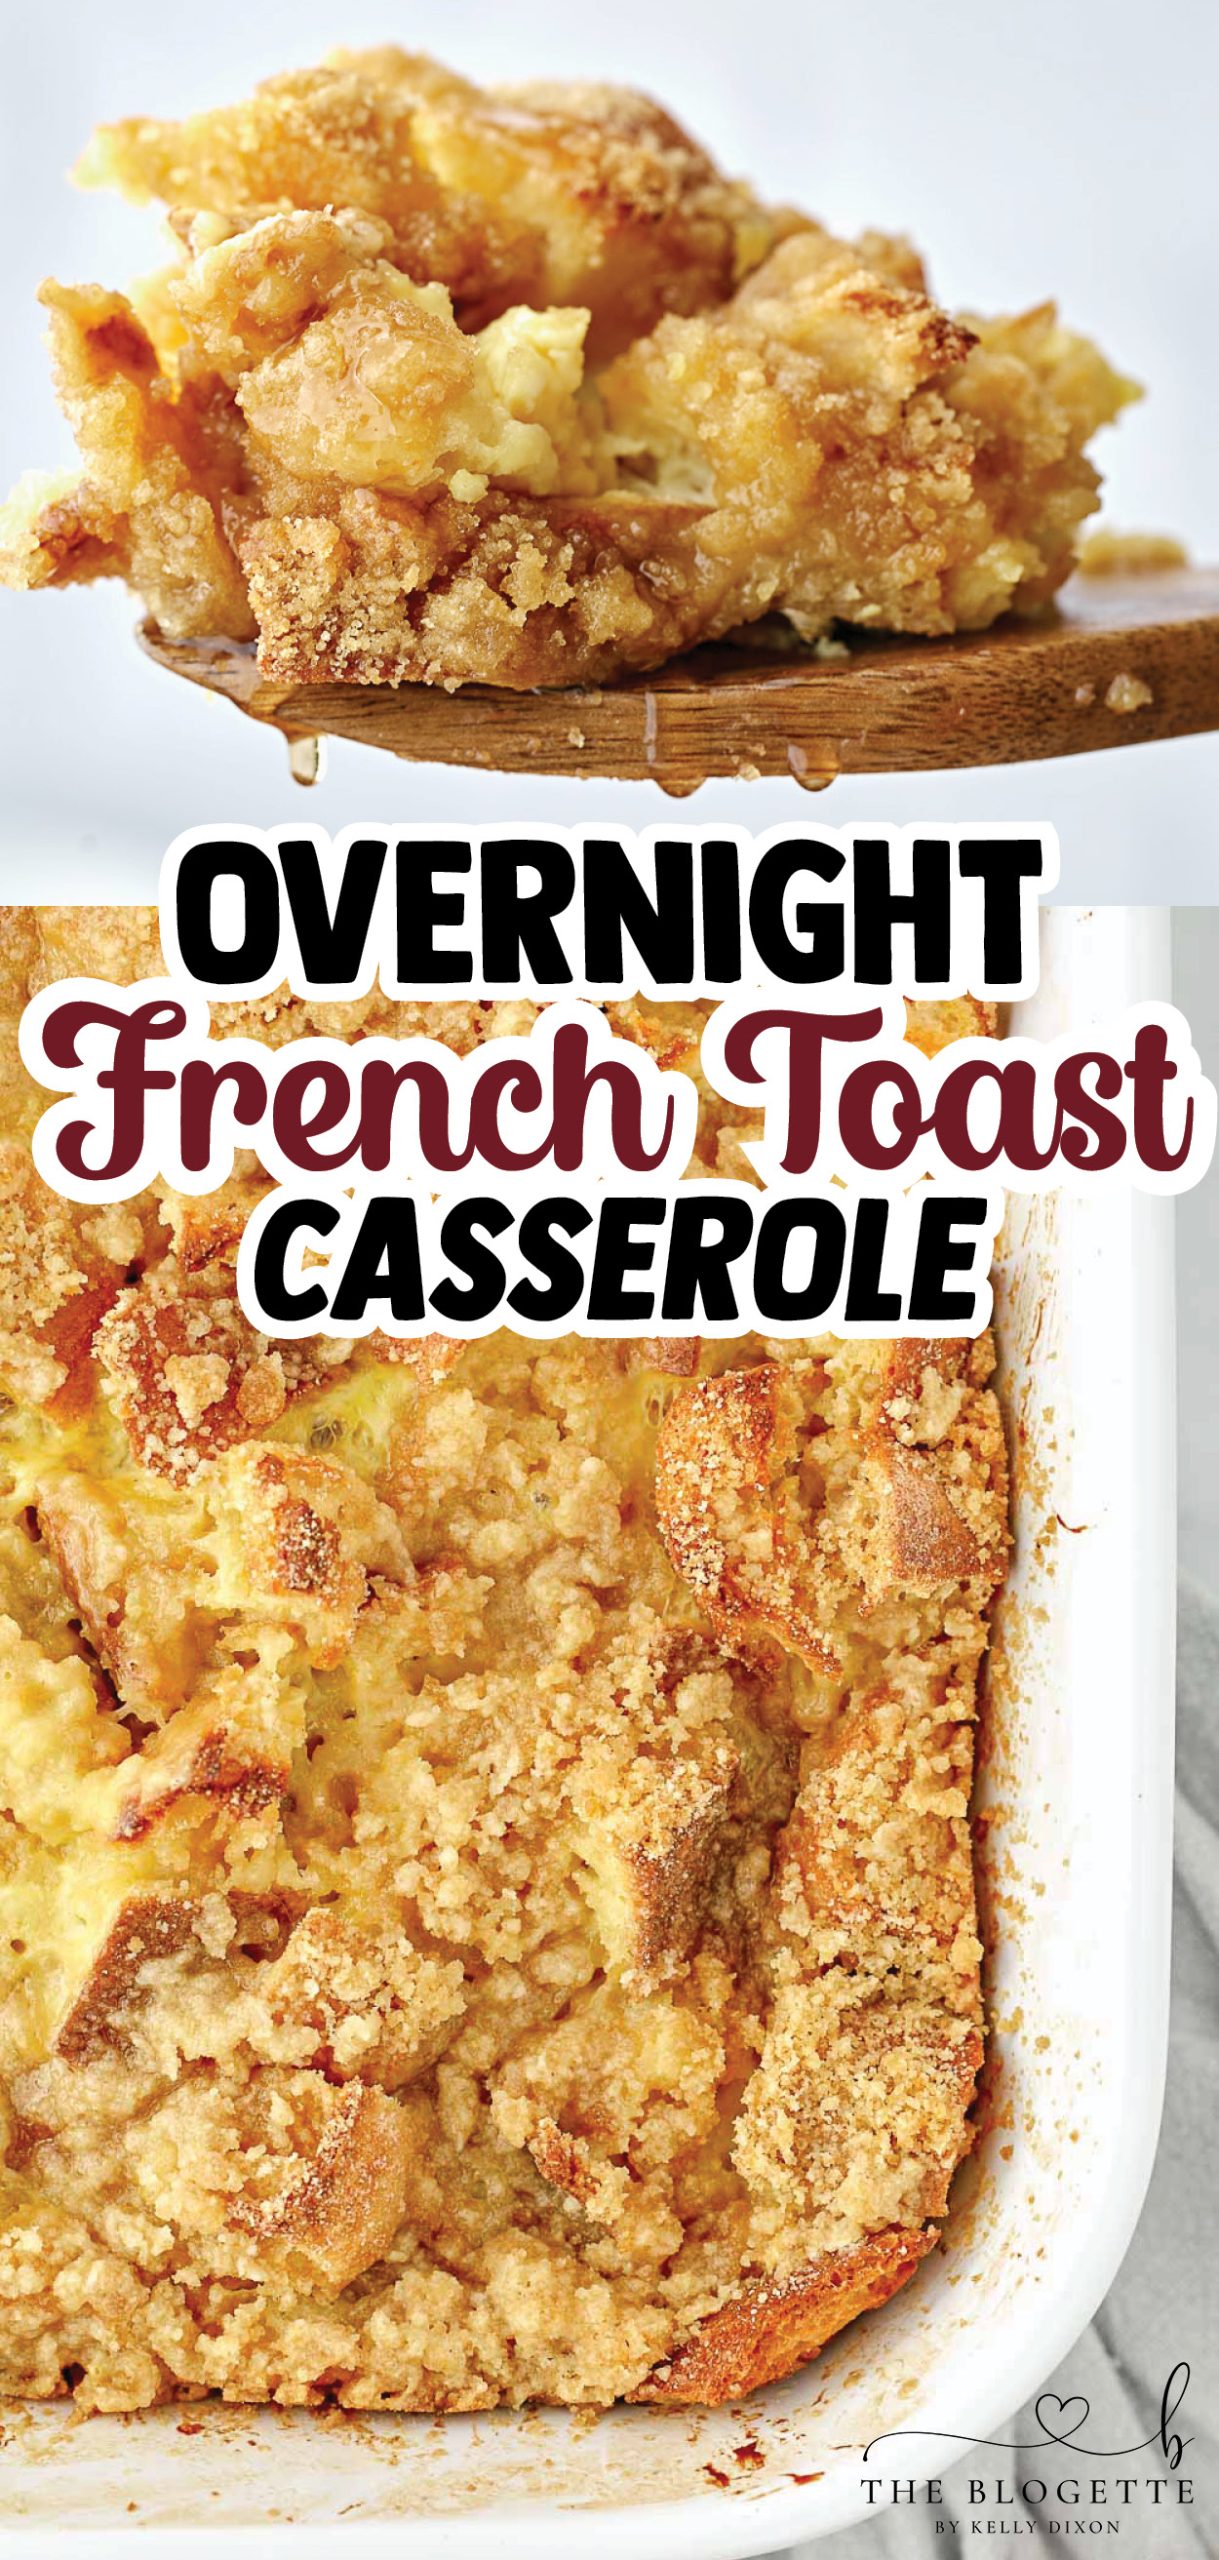 Delicious Overnight French Toast Casserole is perfect for an Easter or a holiday brunch! This breakfast bake is a sweet and filling crowd-pleaser. A make-ahead dish, so you don’t feel tied to the kitchen. 